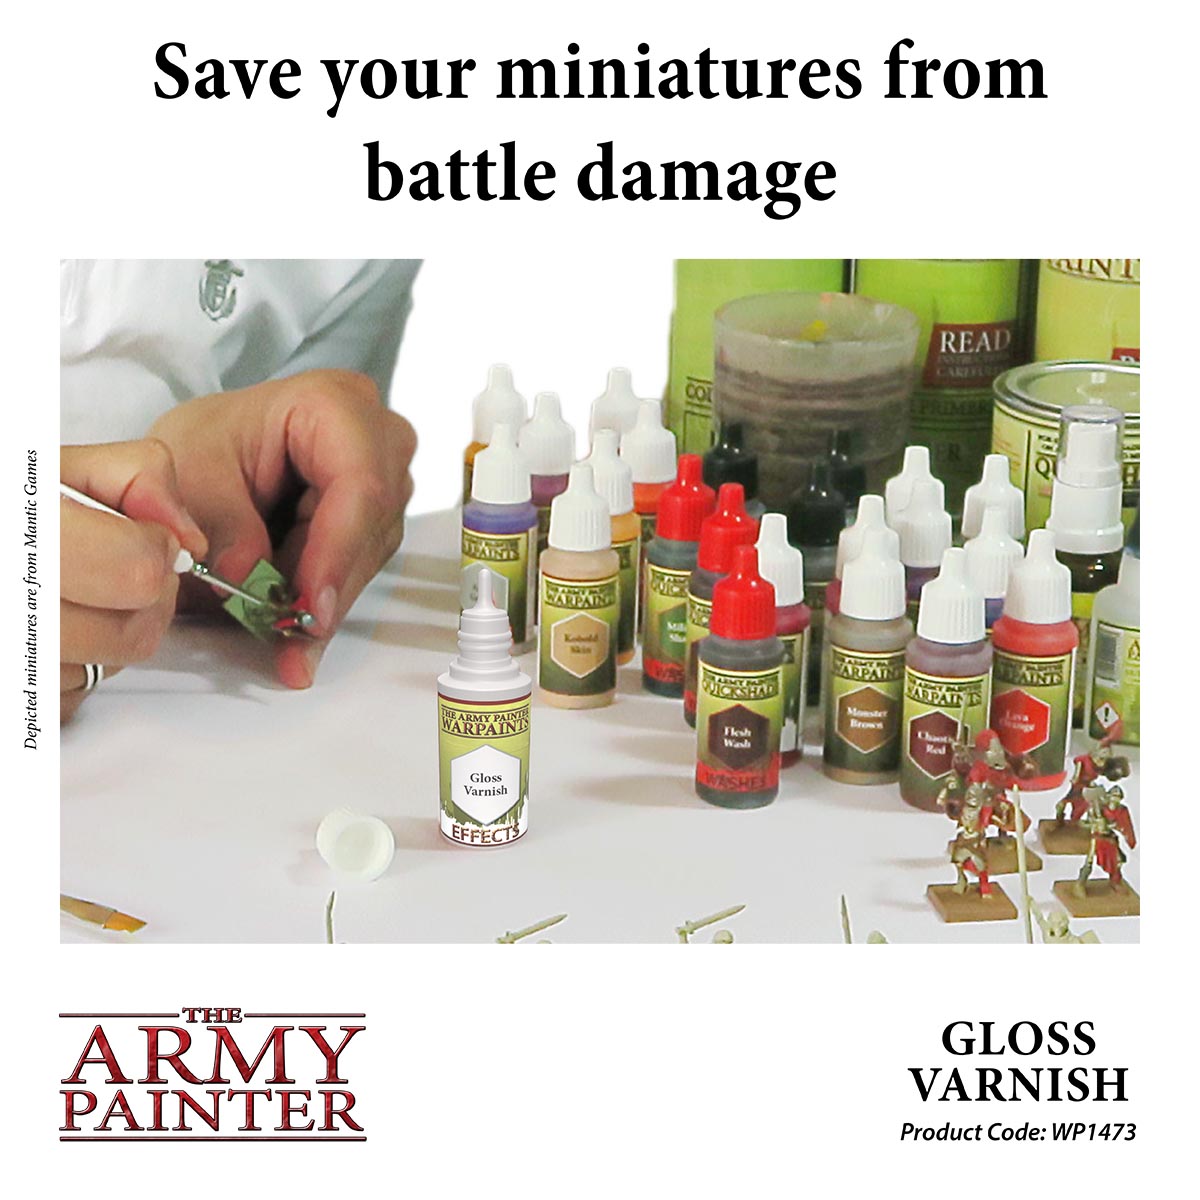 ARMY PAINTER Acrylic WARPAINT Complete Range Gloss/Flat/Washes/Effects